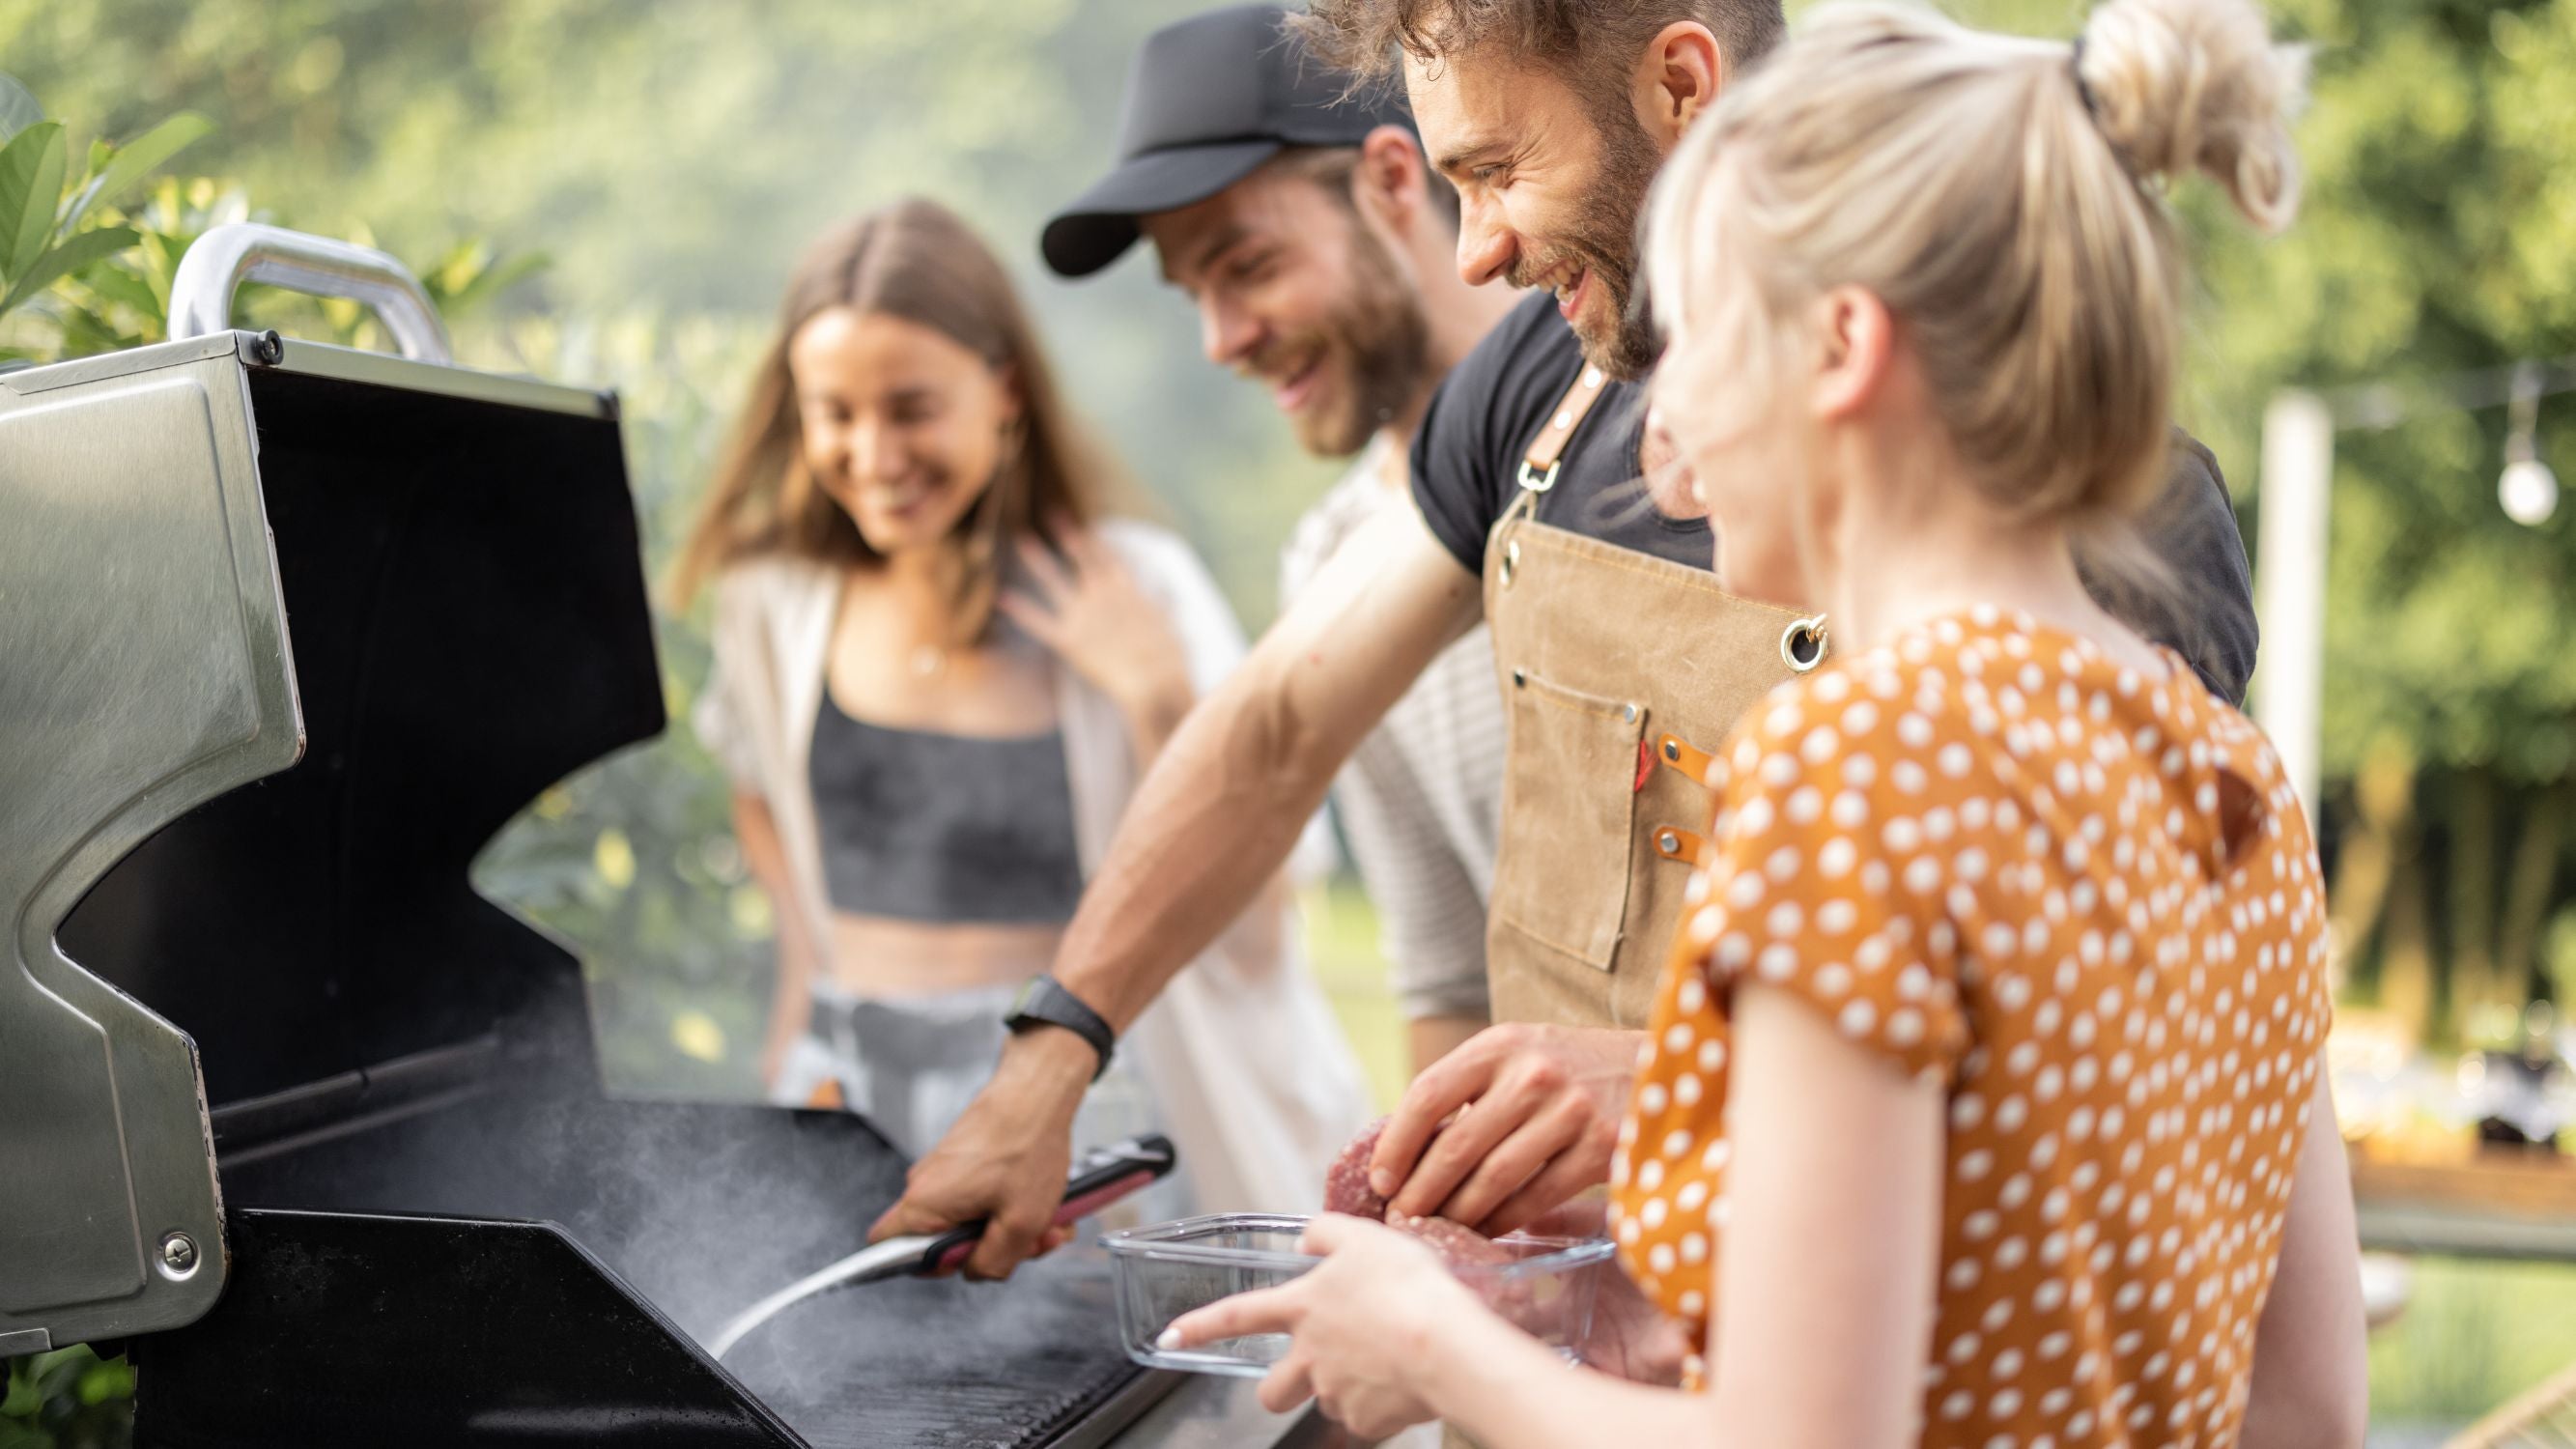 BBQ Grill Collection | Premium Grilling Equipment and Accessories | MeatKing.hk